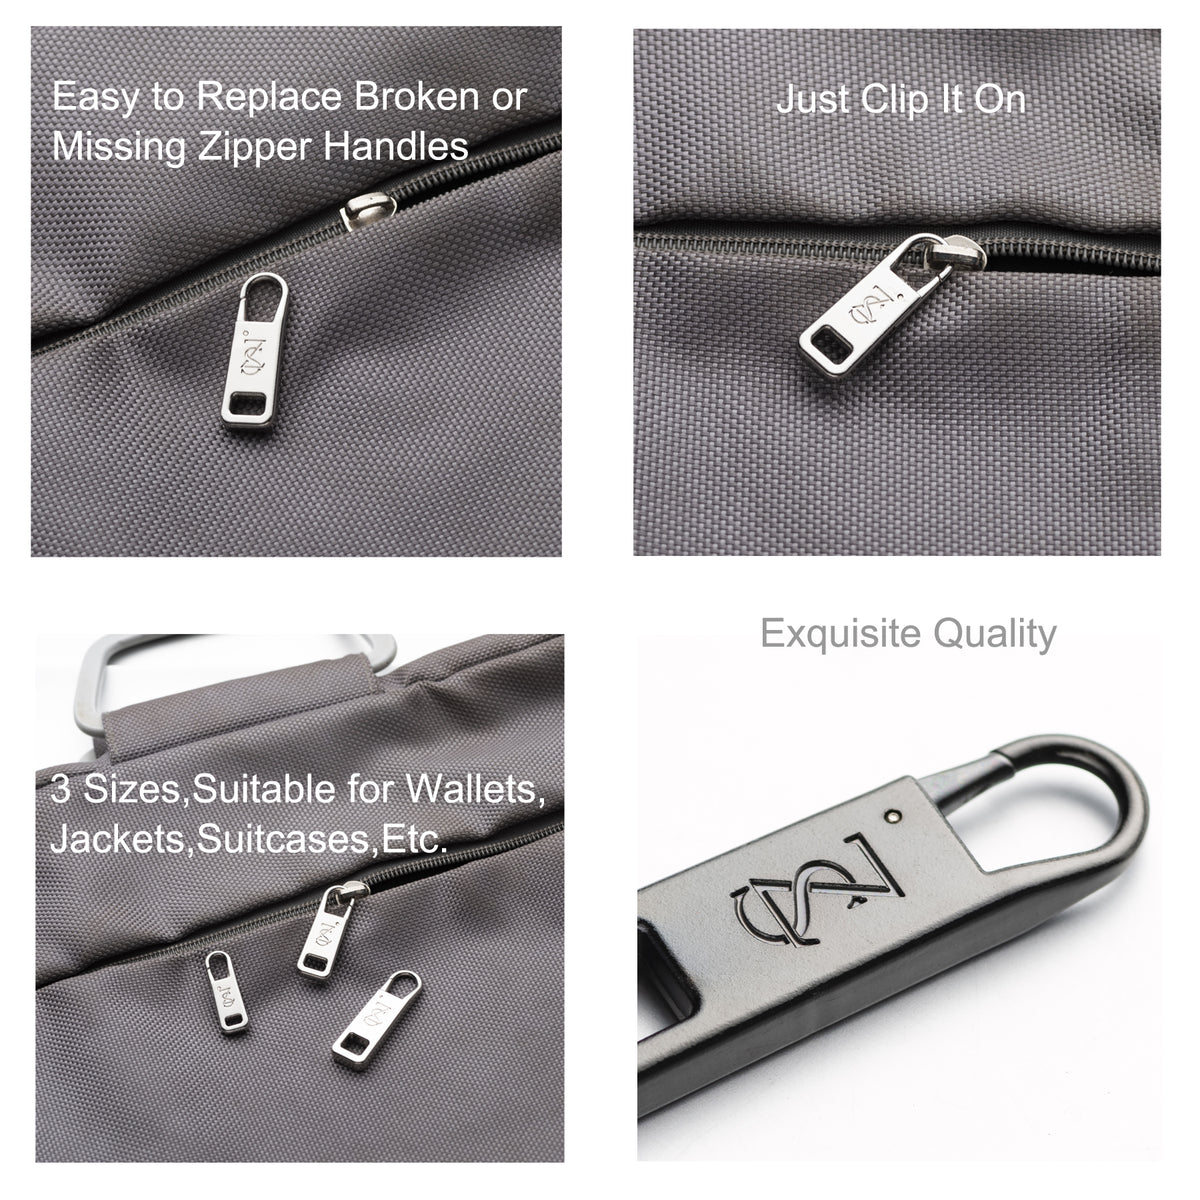 3 Size Zipper Tab Replacement Easy to Replace Broken or Missing